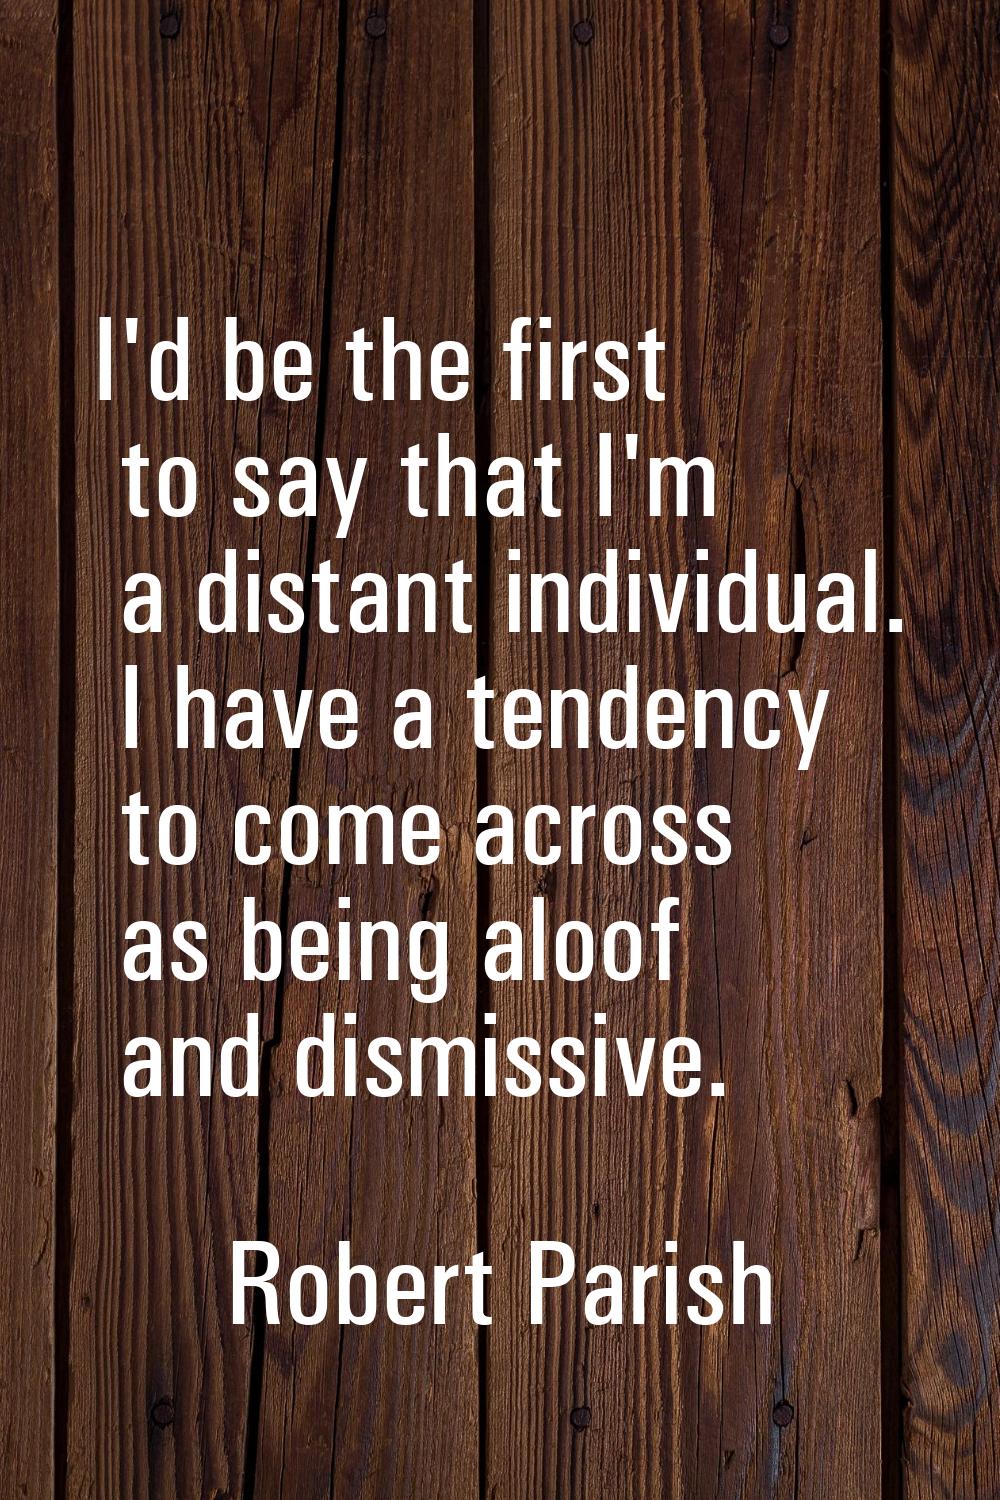 I'd be the first to say that I'm a distant individual. I have a tendency to come across as being al